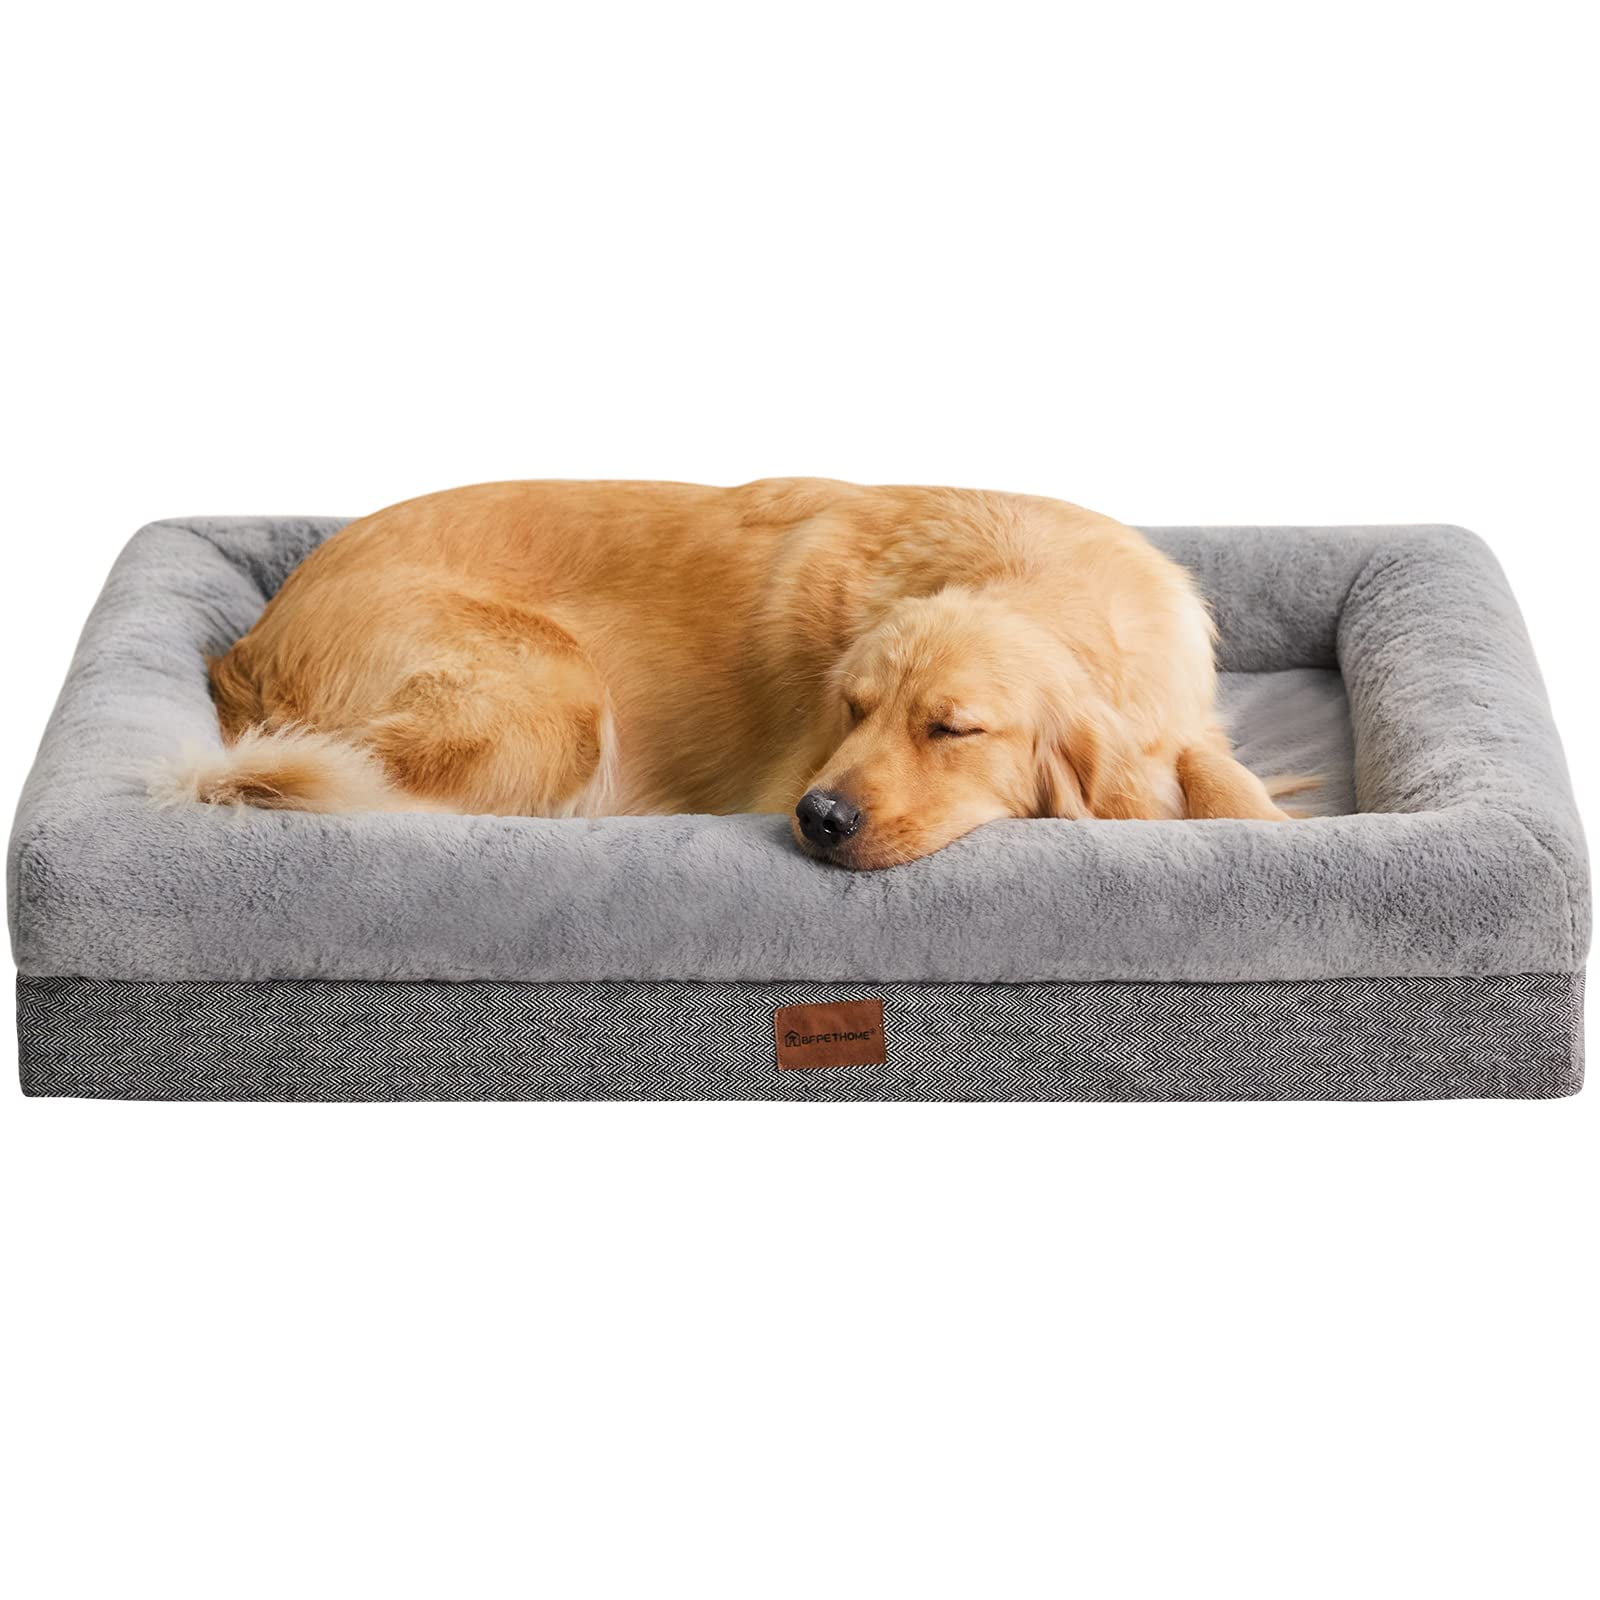 BFPETHOME Dog Bed for Large Dogs, Washable Dog Bed with Sides ...